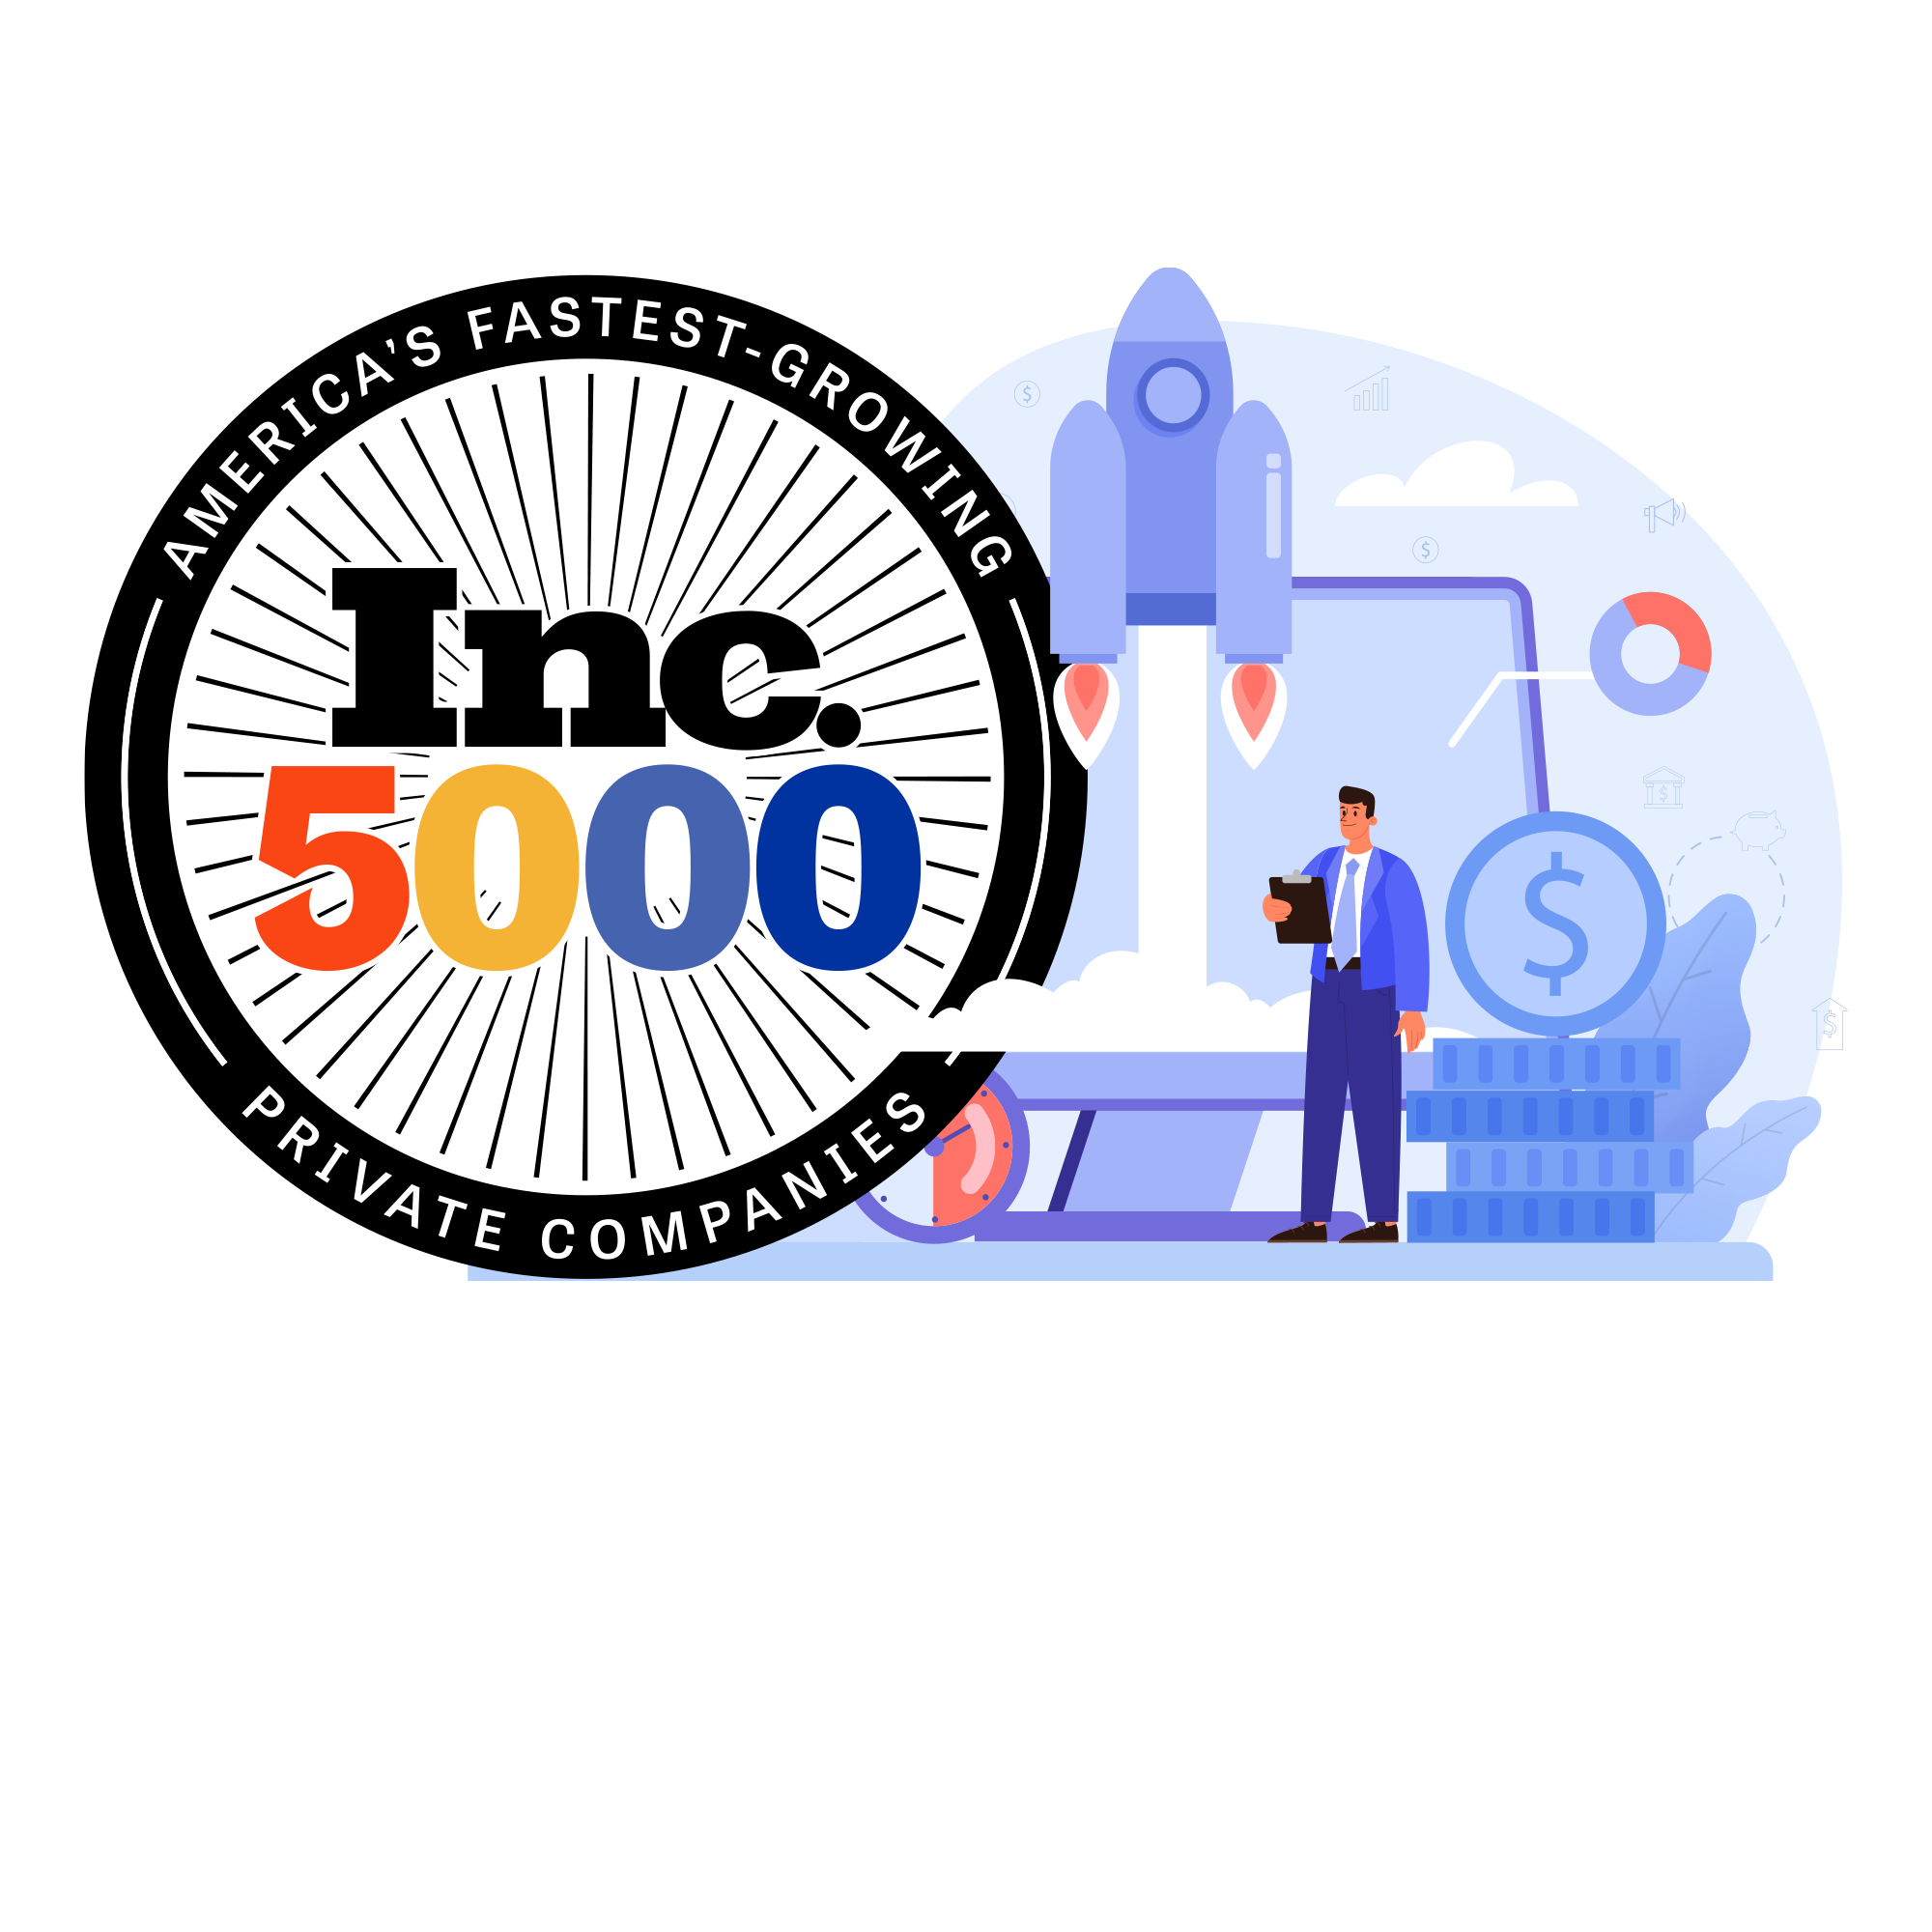 Inc. 5000: Discount PC Named One of America’s Fastest Growing Companies